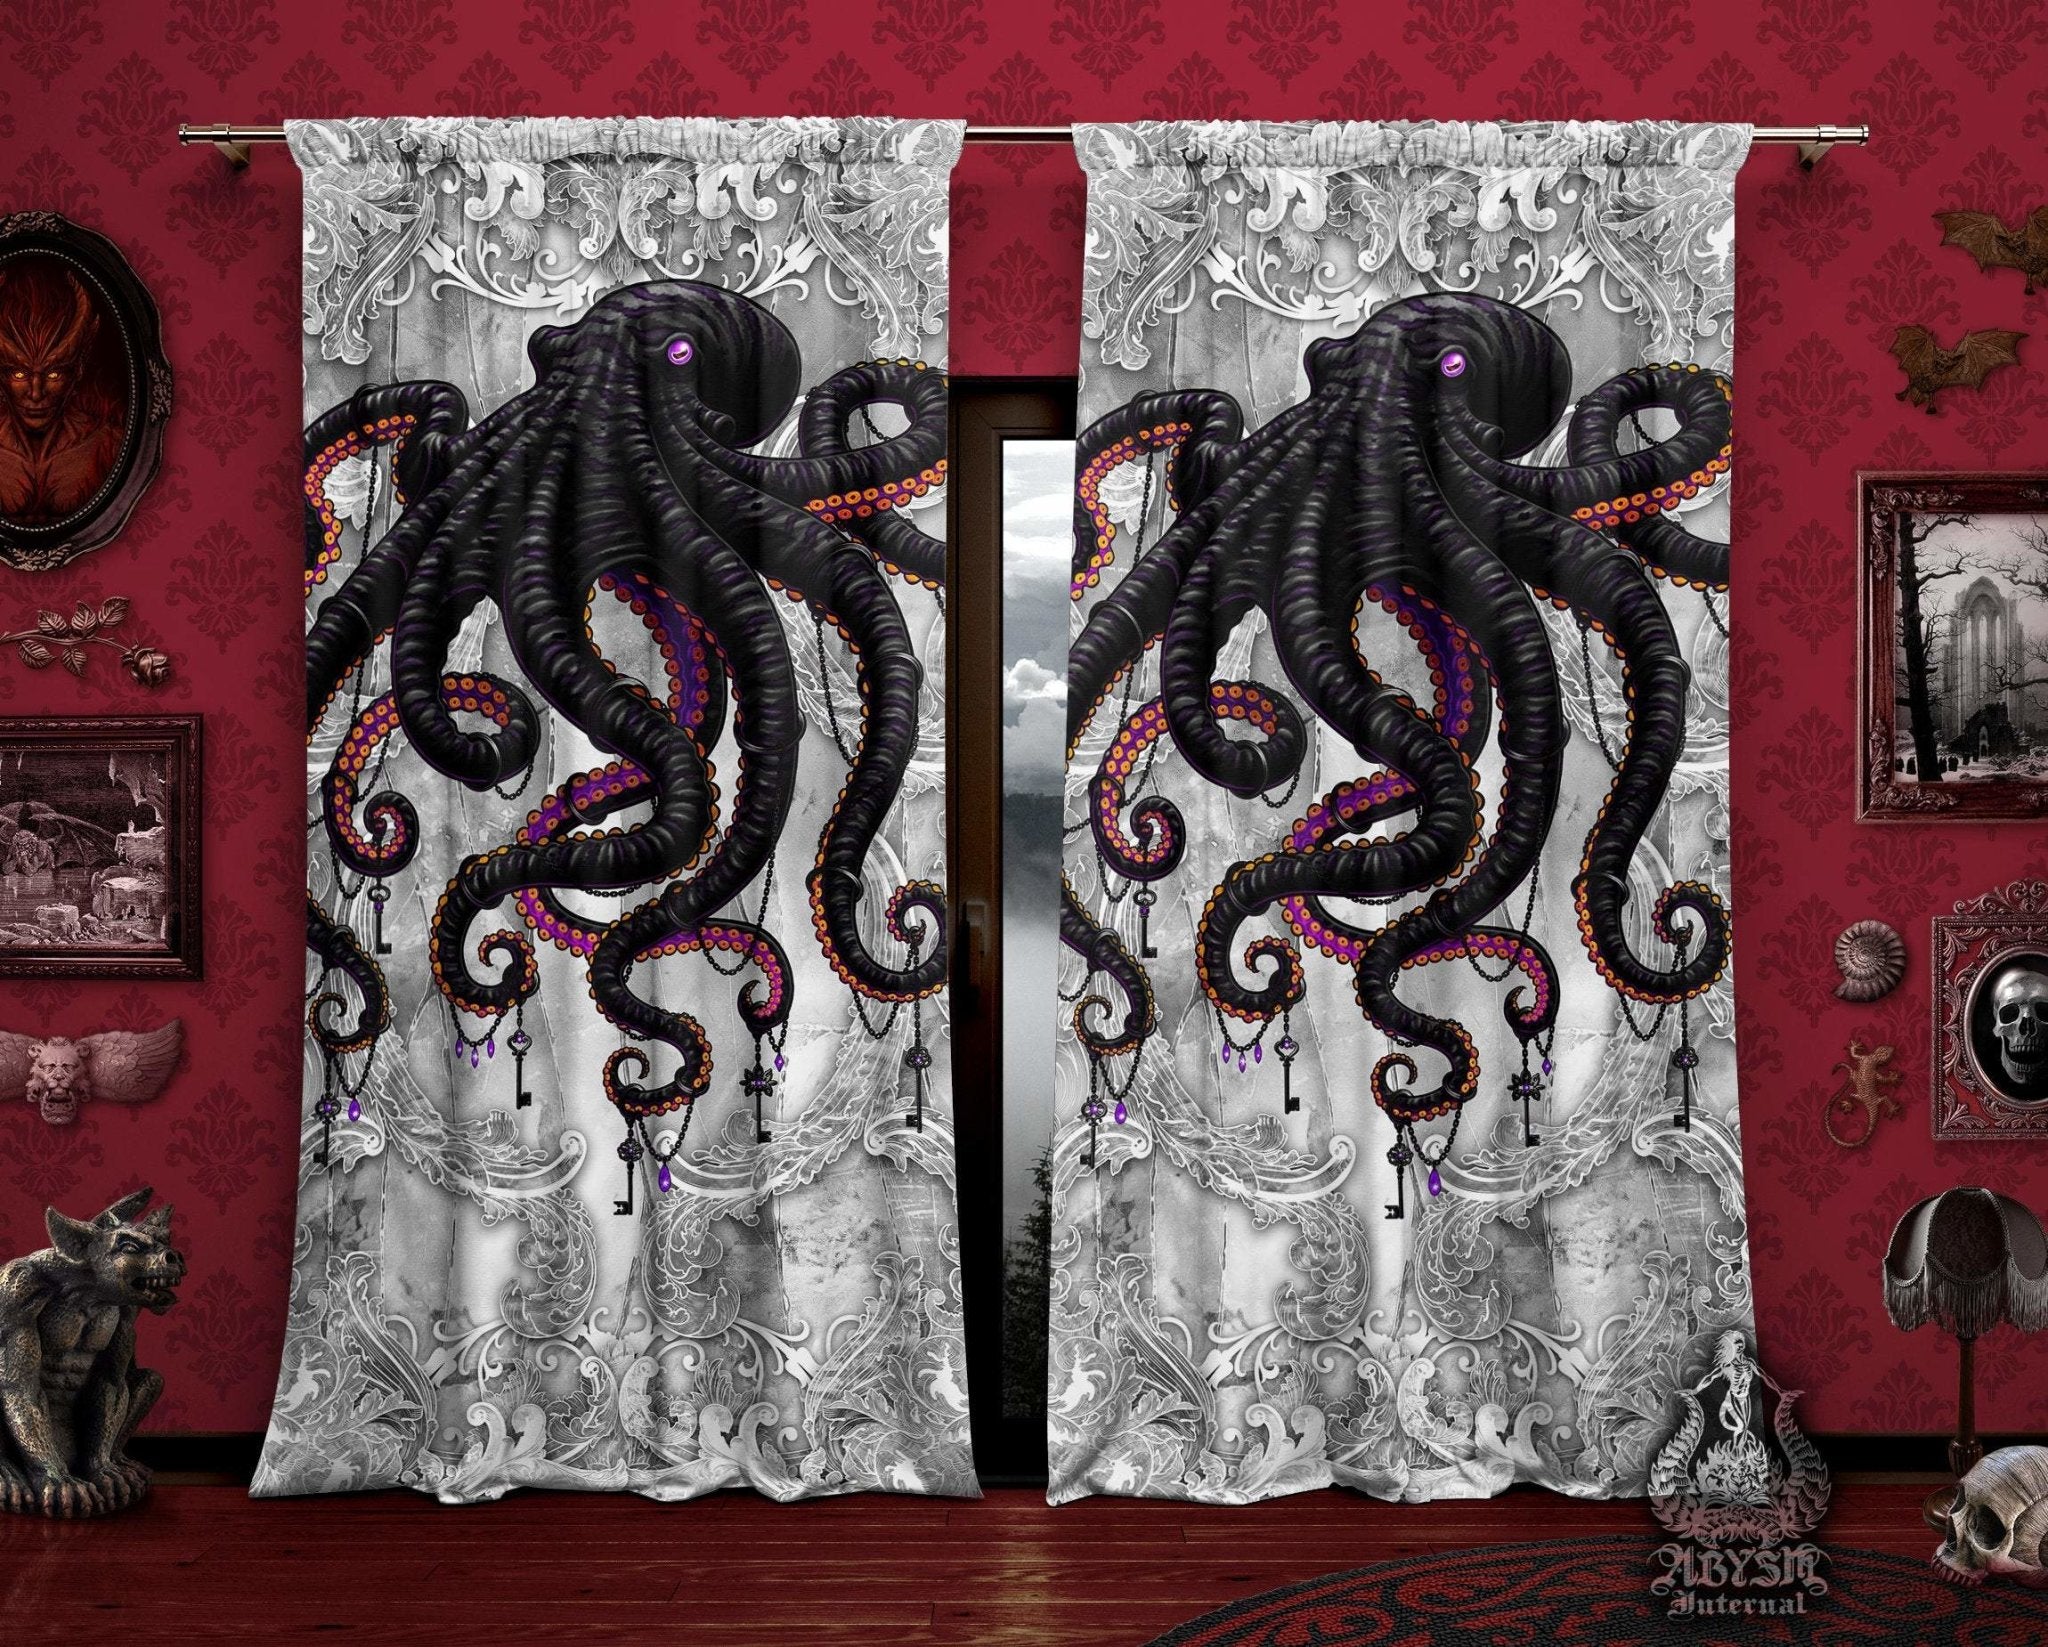 Octopus Blackout Curtains, Long Window Panels, Indie Room Decor, Art Print - White Goth - Abysm Internal